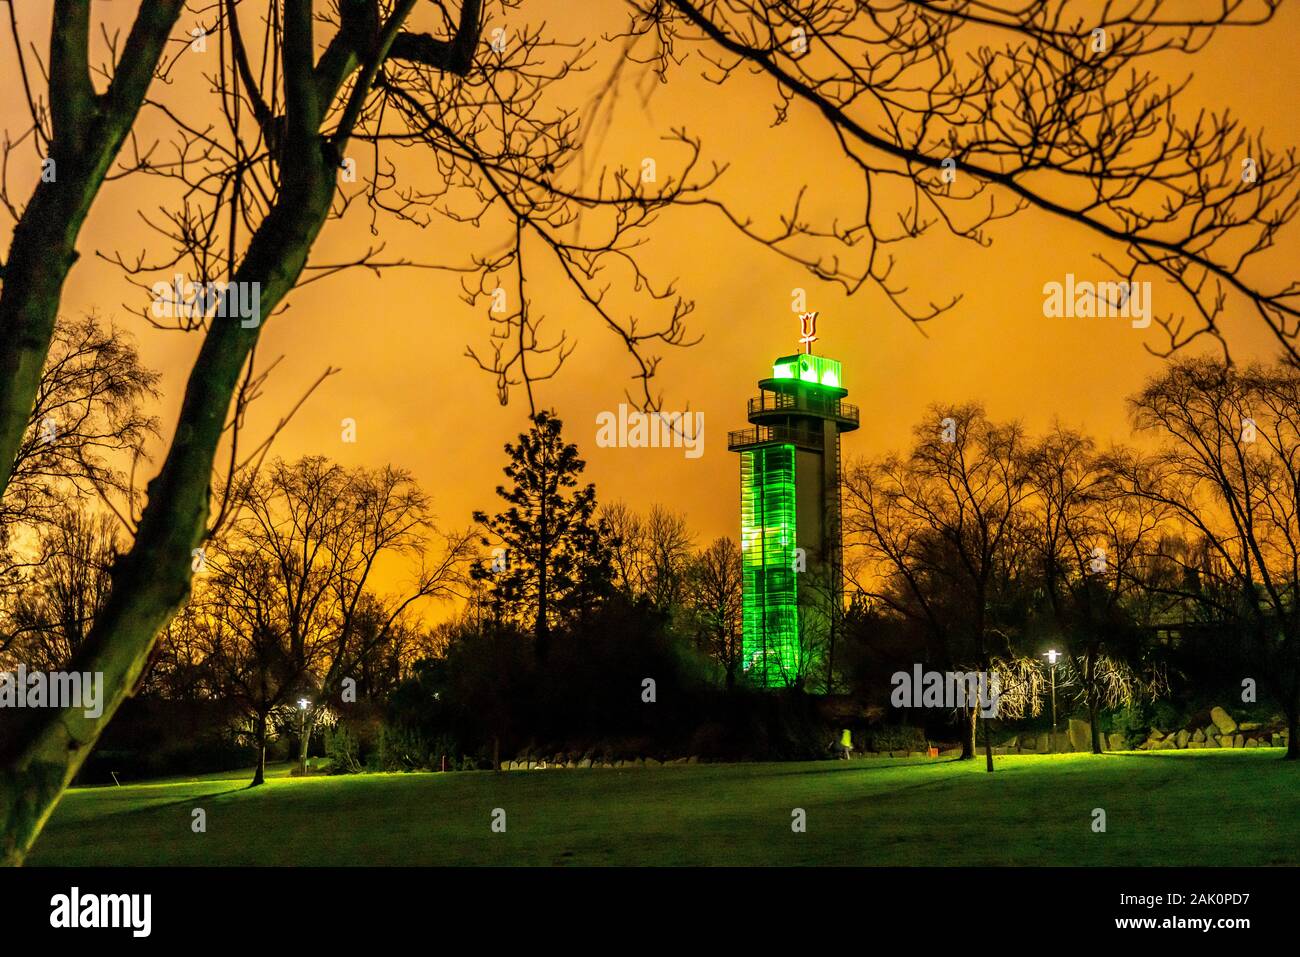 The Grugapark, landscape Park, evenings, in winter, The Grugaturm, Observation Tower, Essen, Germany, Stock Photo